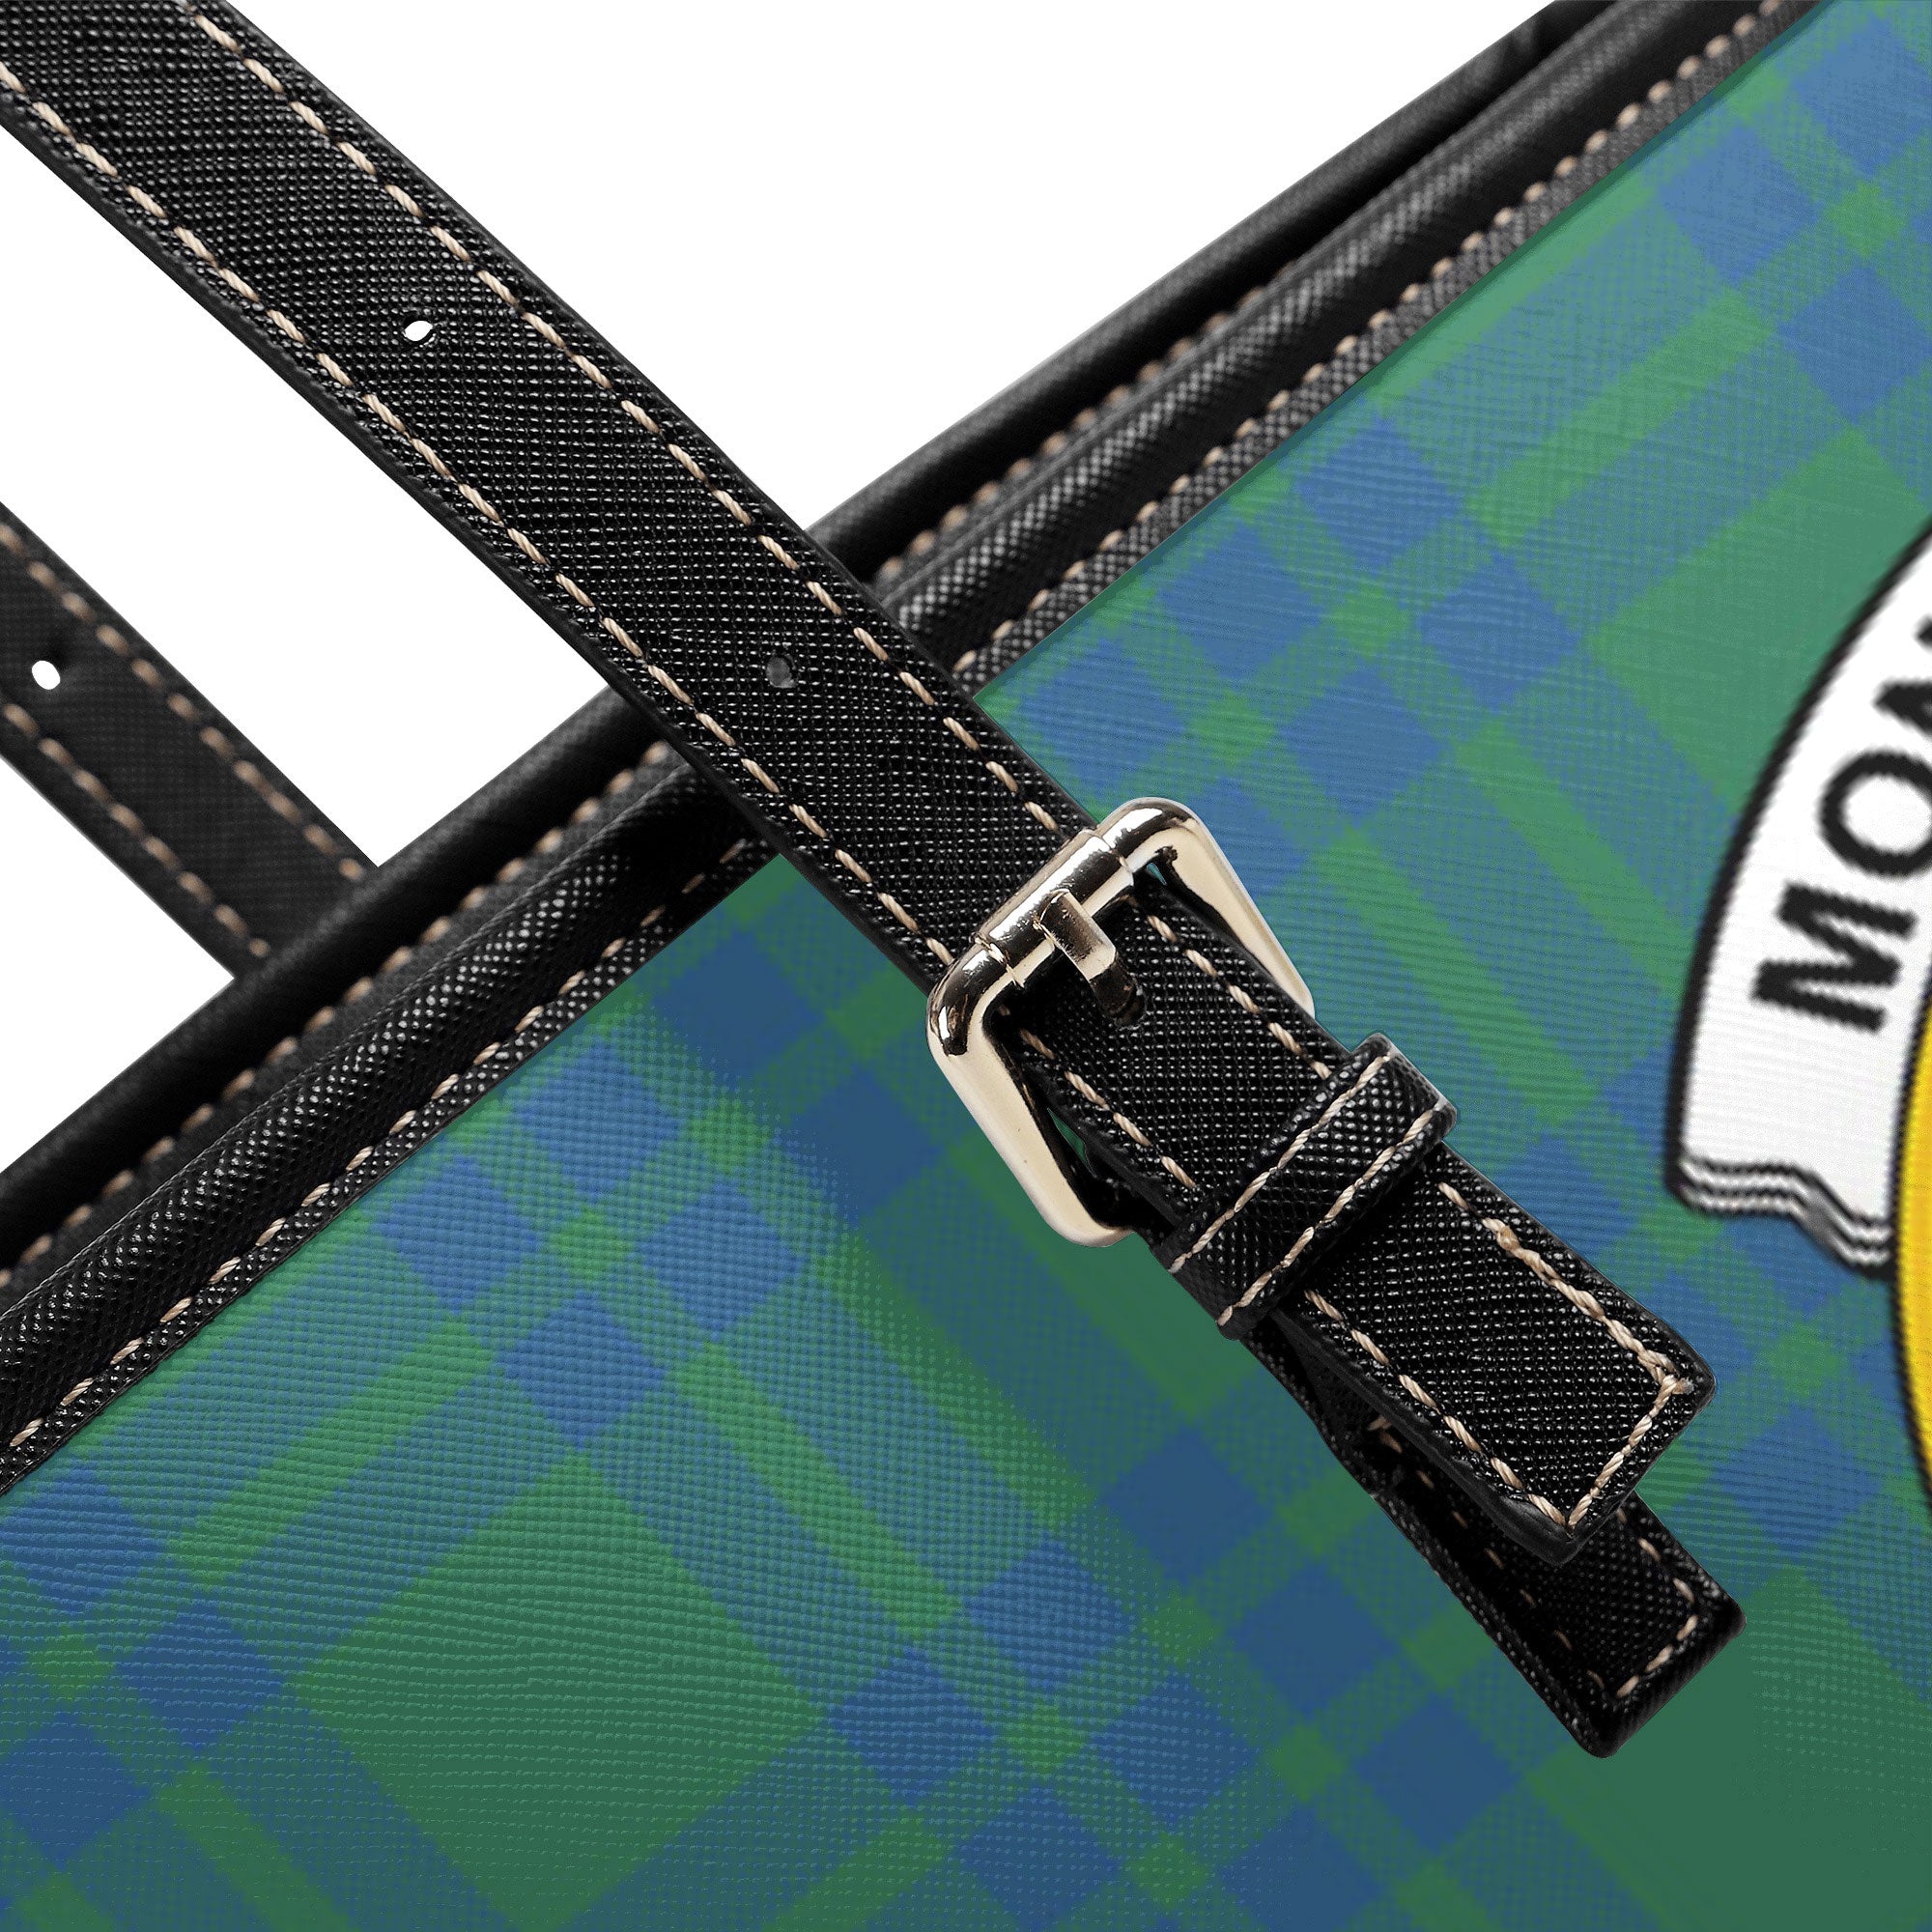 Montgomery Ancient Tartan Crest Leather Tote Bag